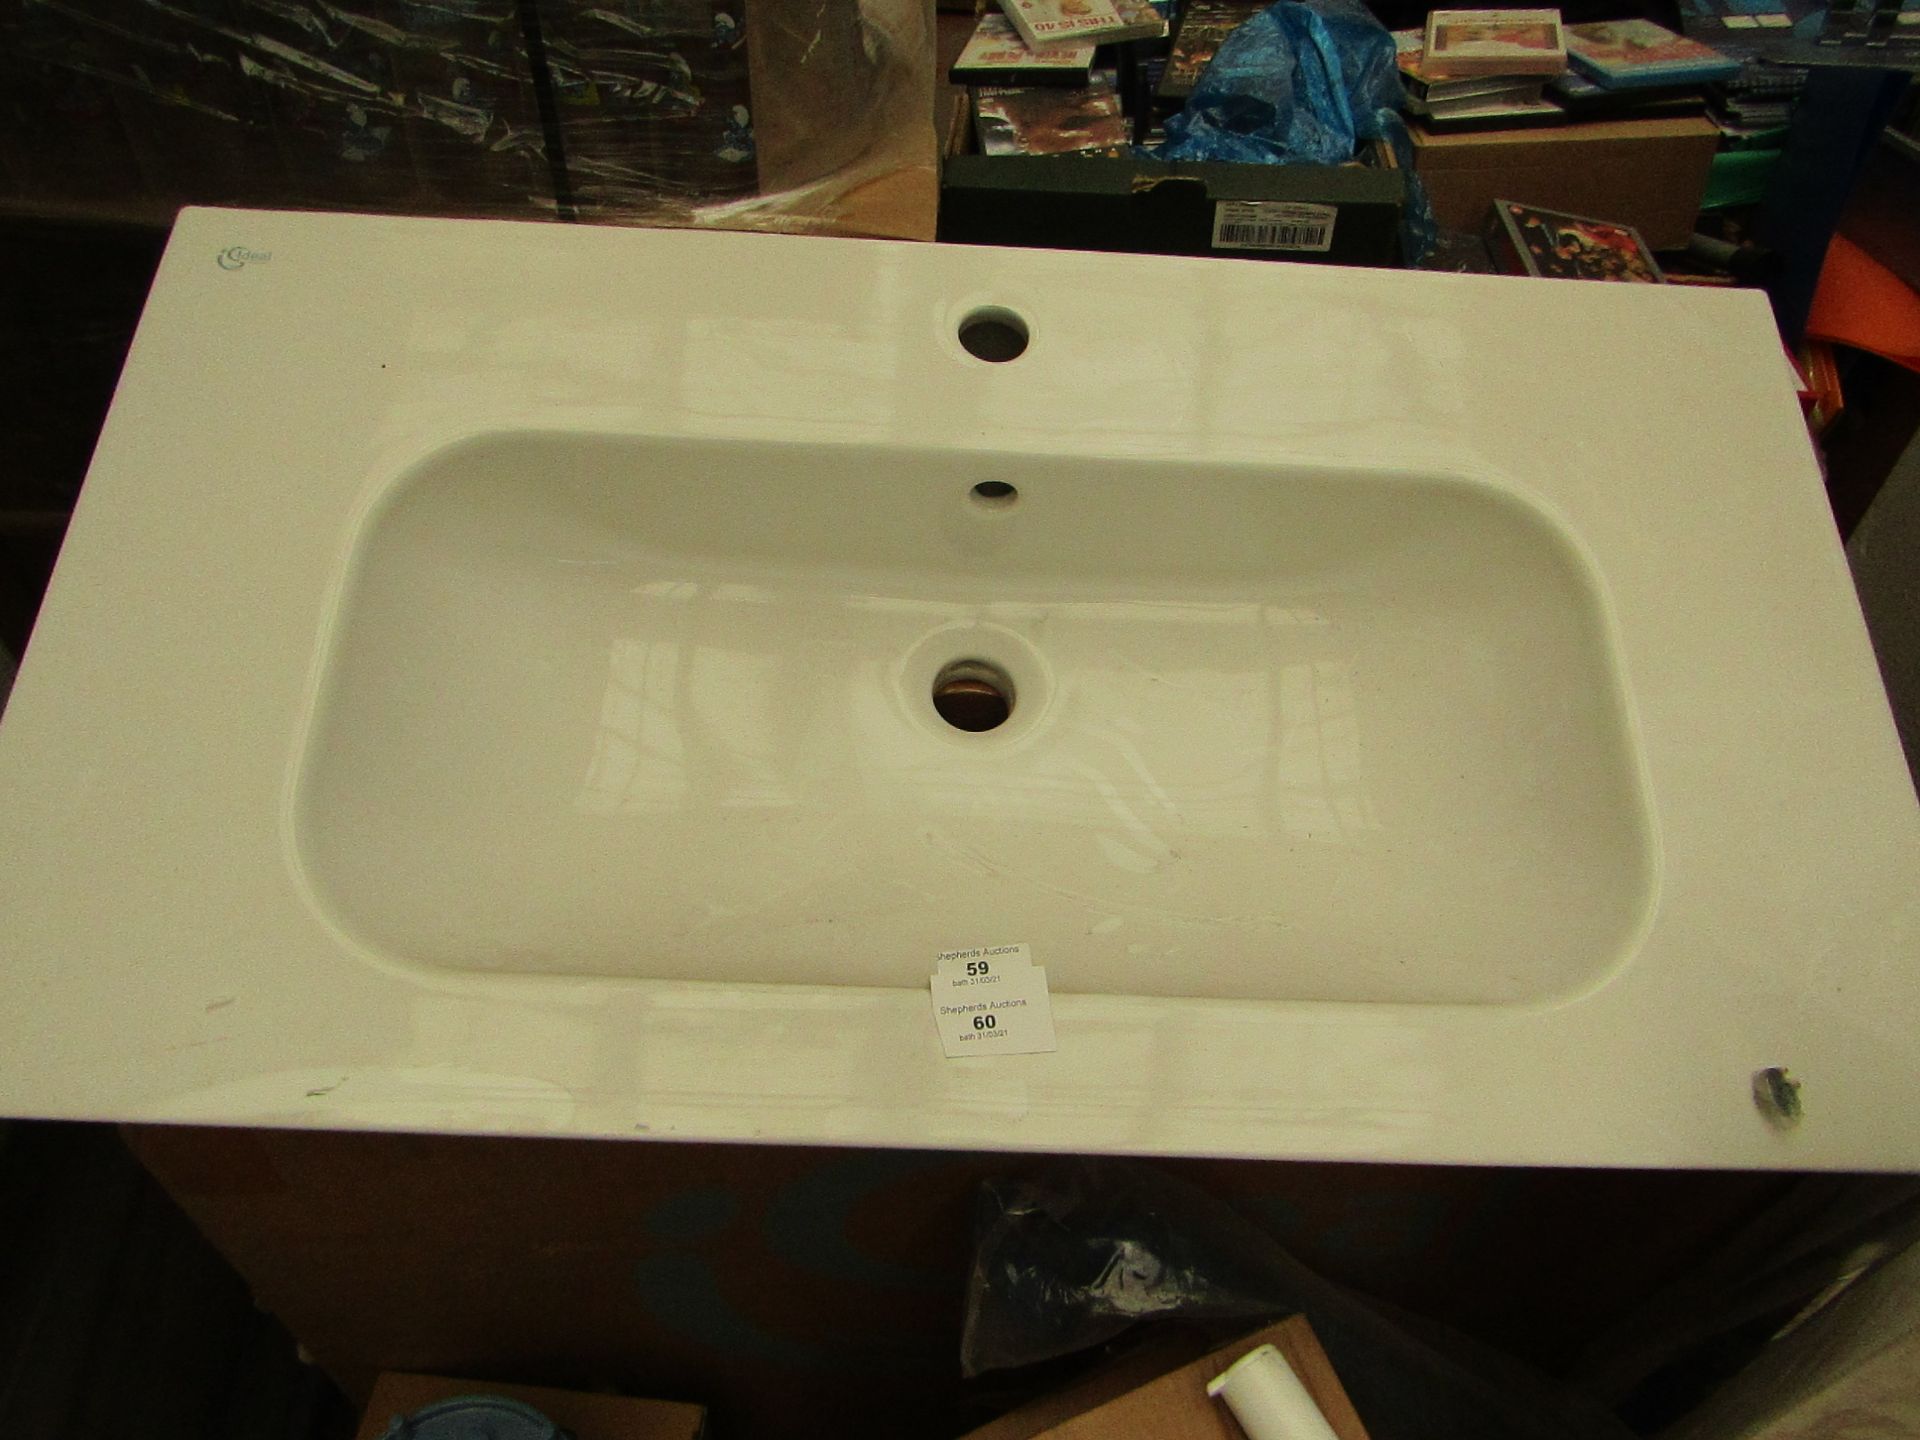 Ideal Standard 850 x 460mm, new and boxed.